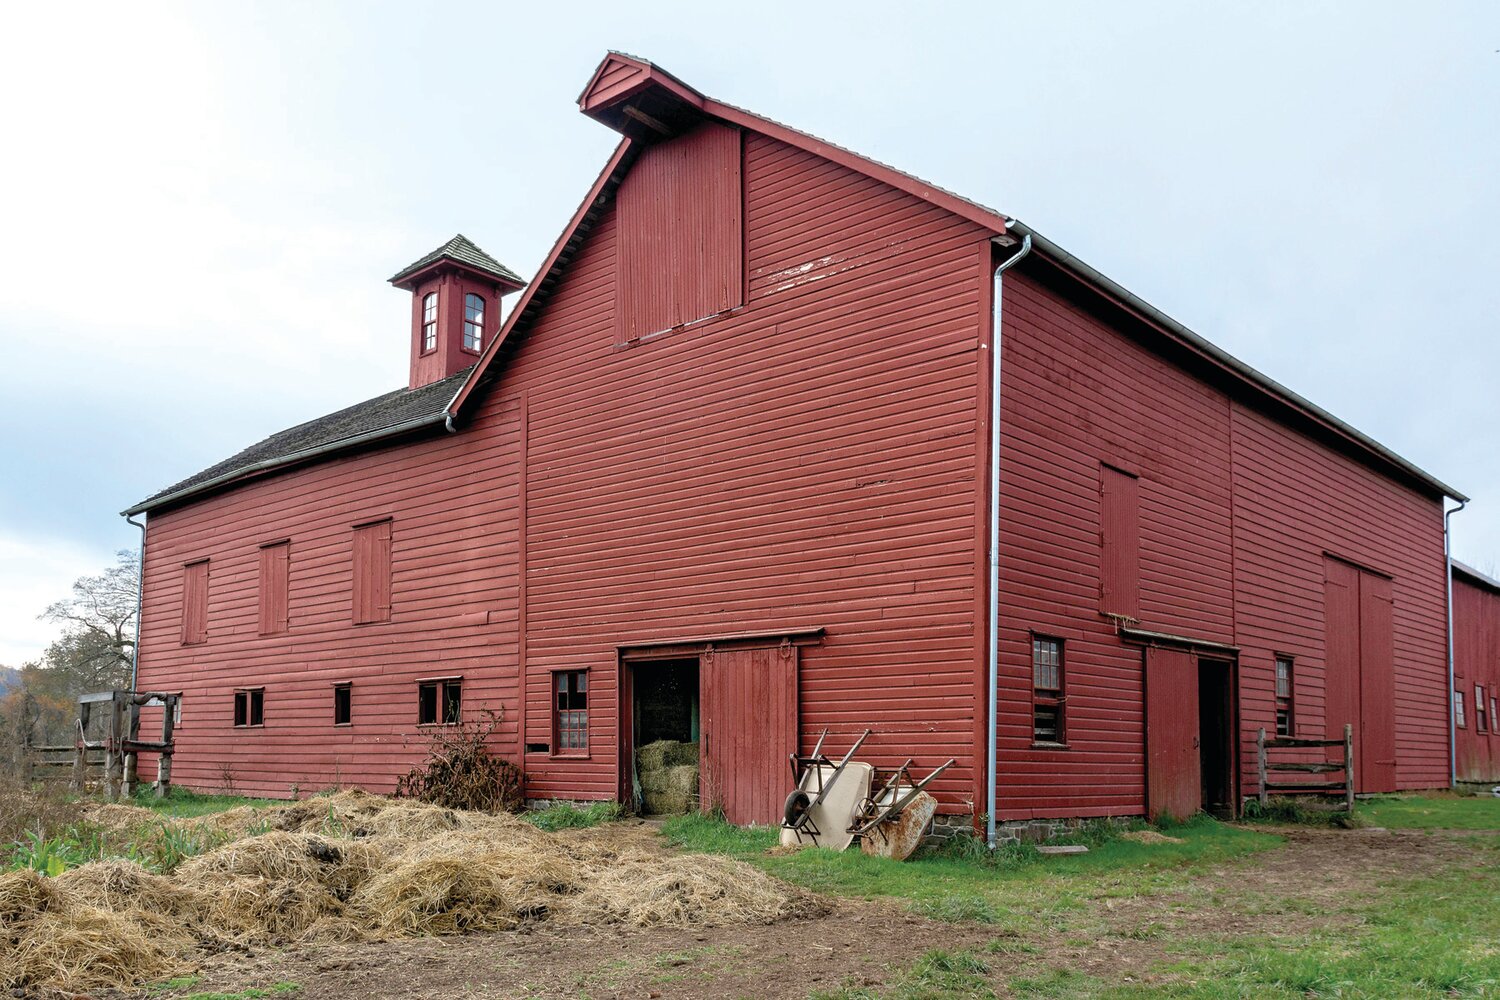 As a living history farm, Howell “continues to operate on a full, working scale by raising crops and livestock, and by using the house and barns as people did in earlier times,”  according to its website.